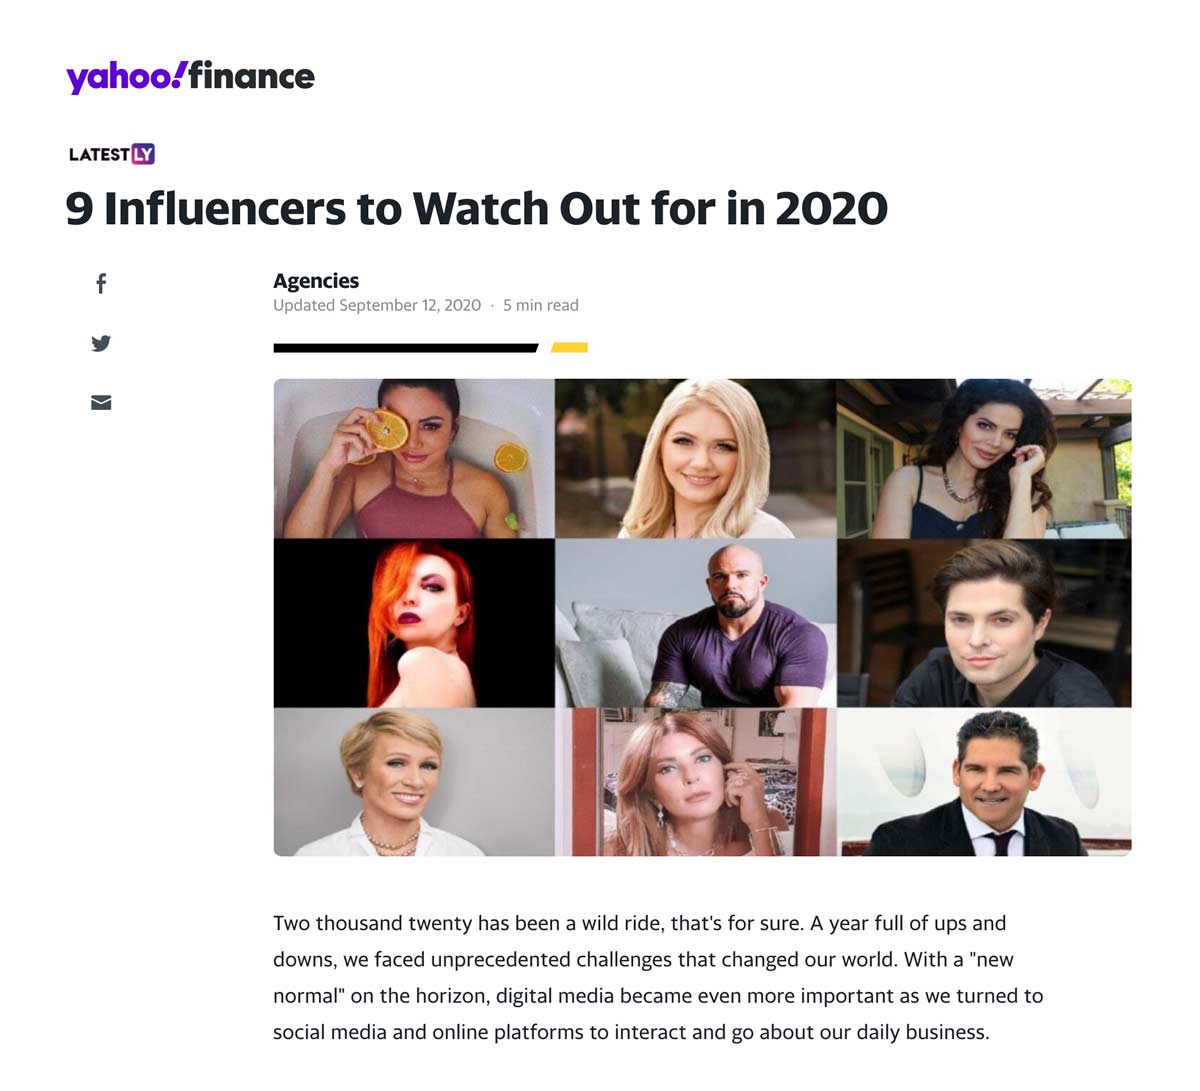 9 Influencers to Watch Out for in 2020